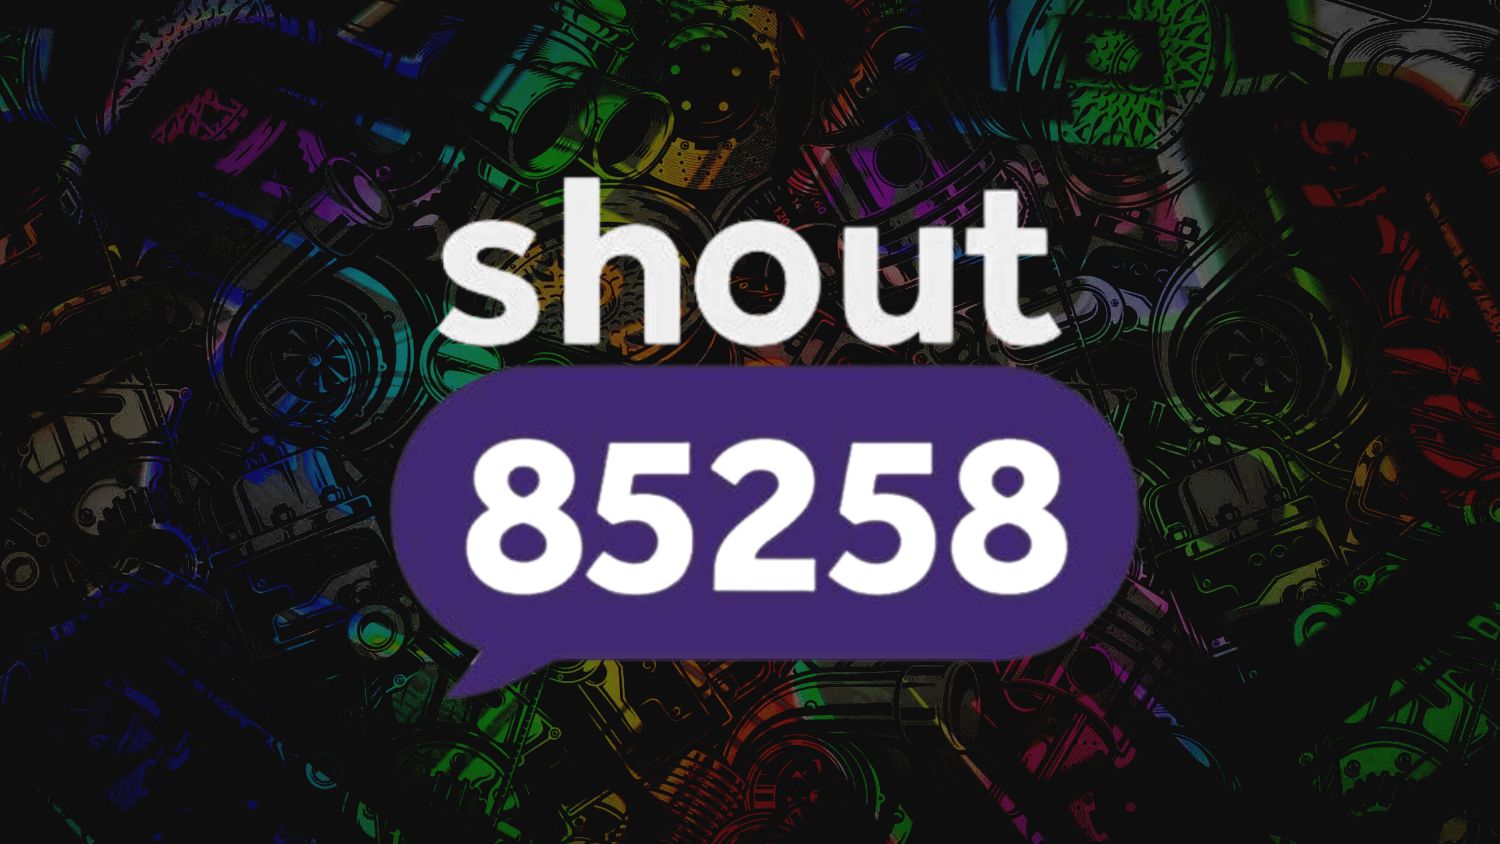 SHOUT 85258 mental health charity logo on pitstop social rainbow petrol theme background